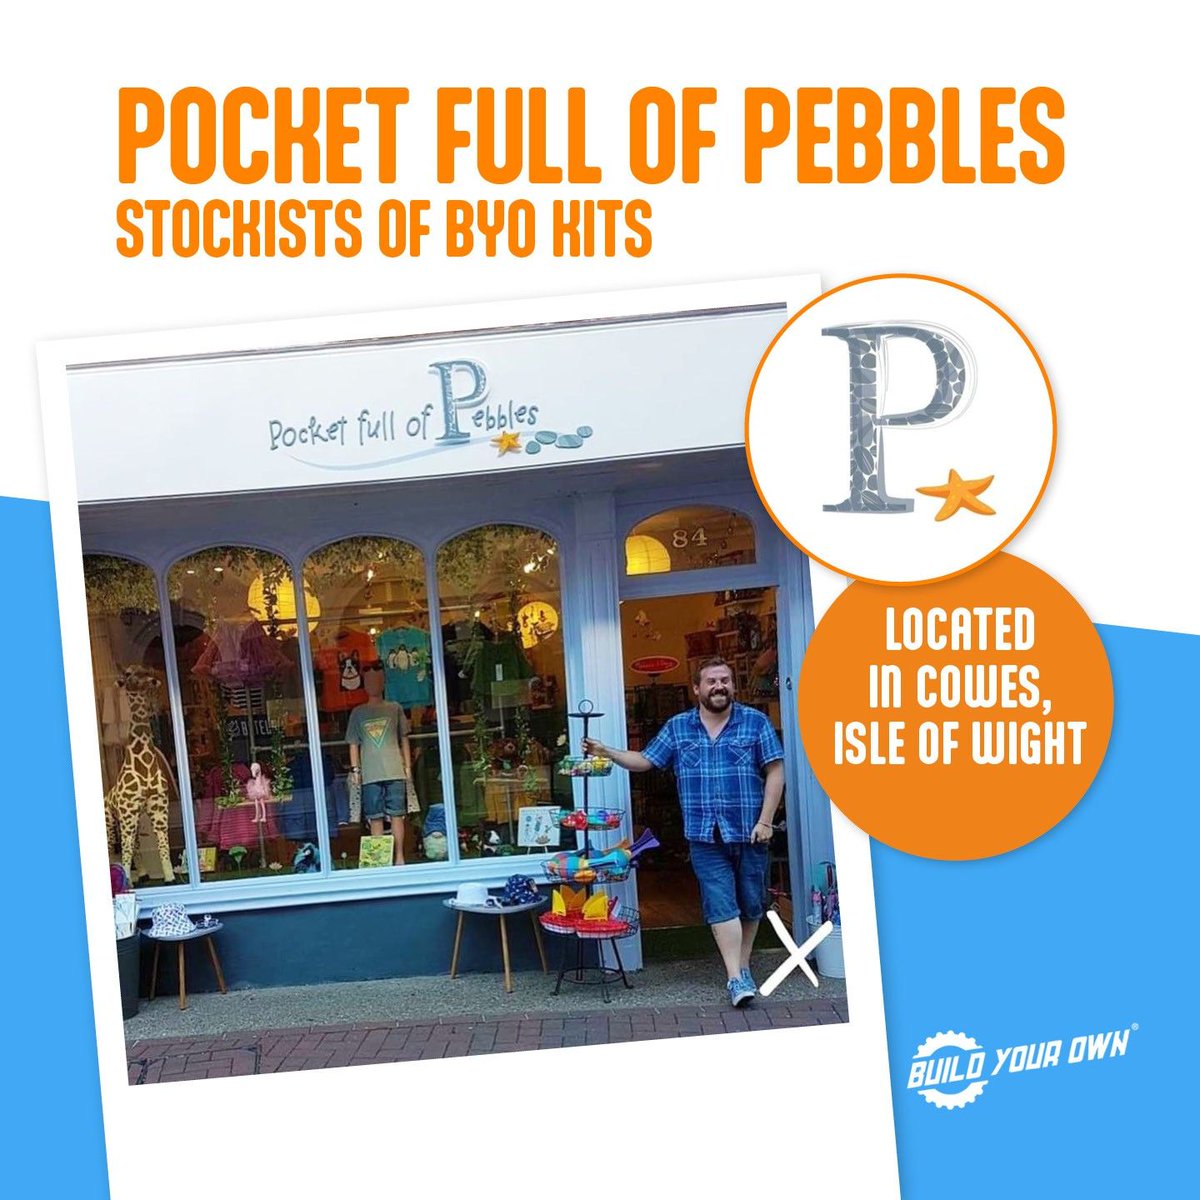 We’re delighted to share that @pocket_full_of_pebbles are a @byokits stockist 🎉 Located in Cowes on the beautiful Isle of Wight, this independent shop is an Aladdin’s cave of unique children’s toys, books, clothing, and homeware 🌟 #byokits #coweshighstreet #toyshop